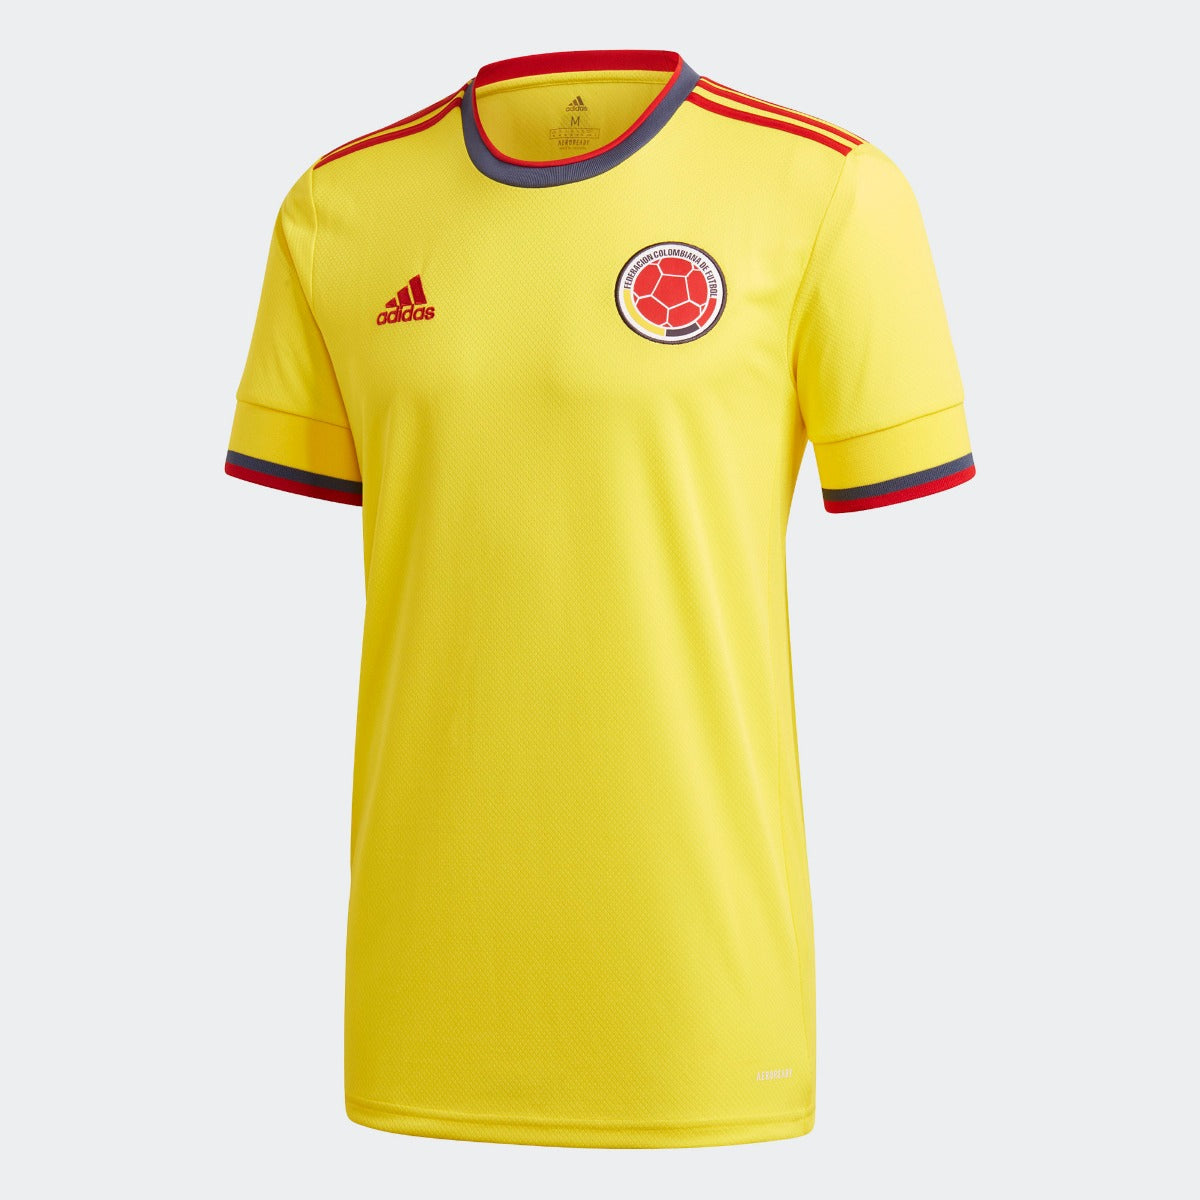 Adidas 2021-22 Colombia Home Jersey - Yellow (Front)